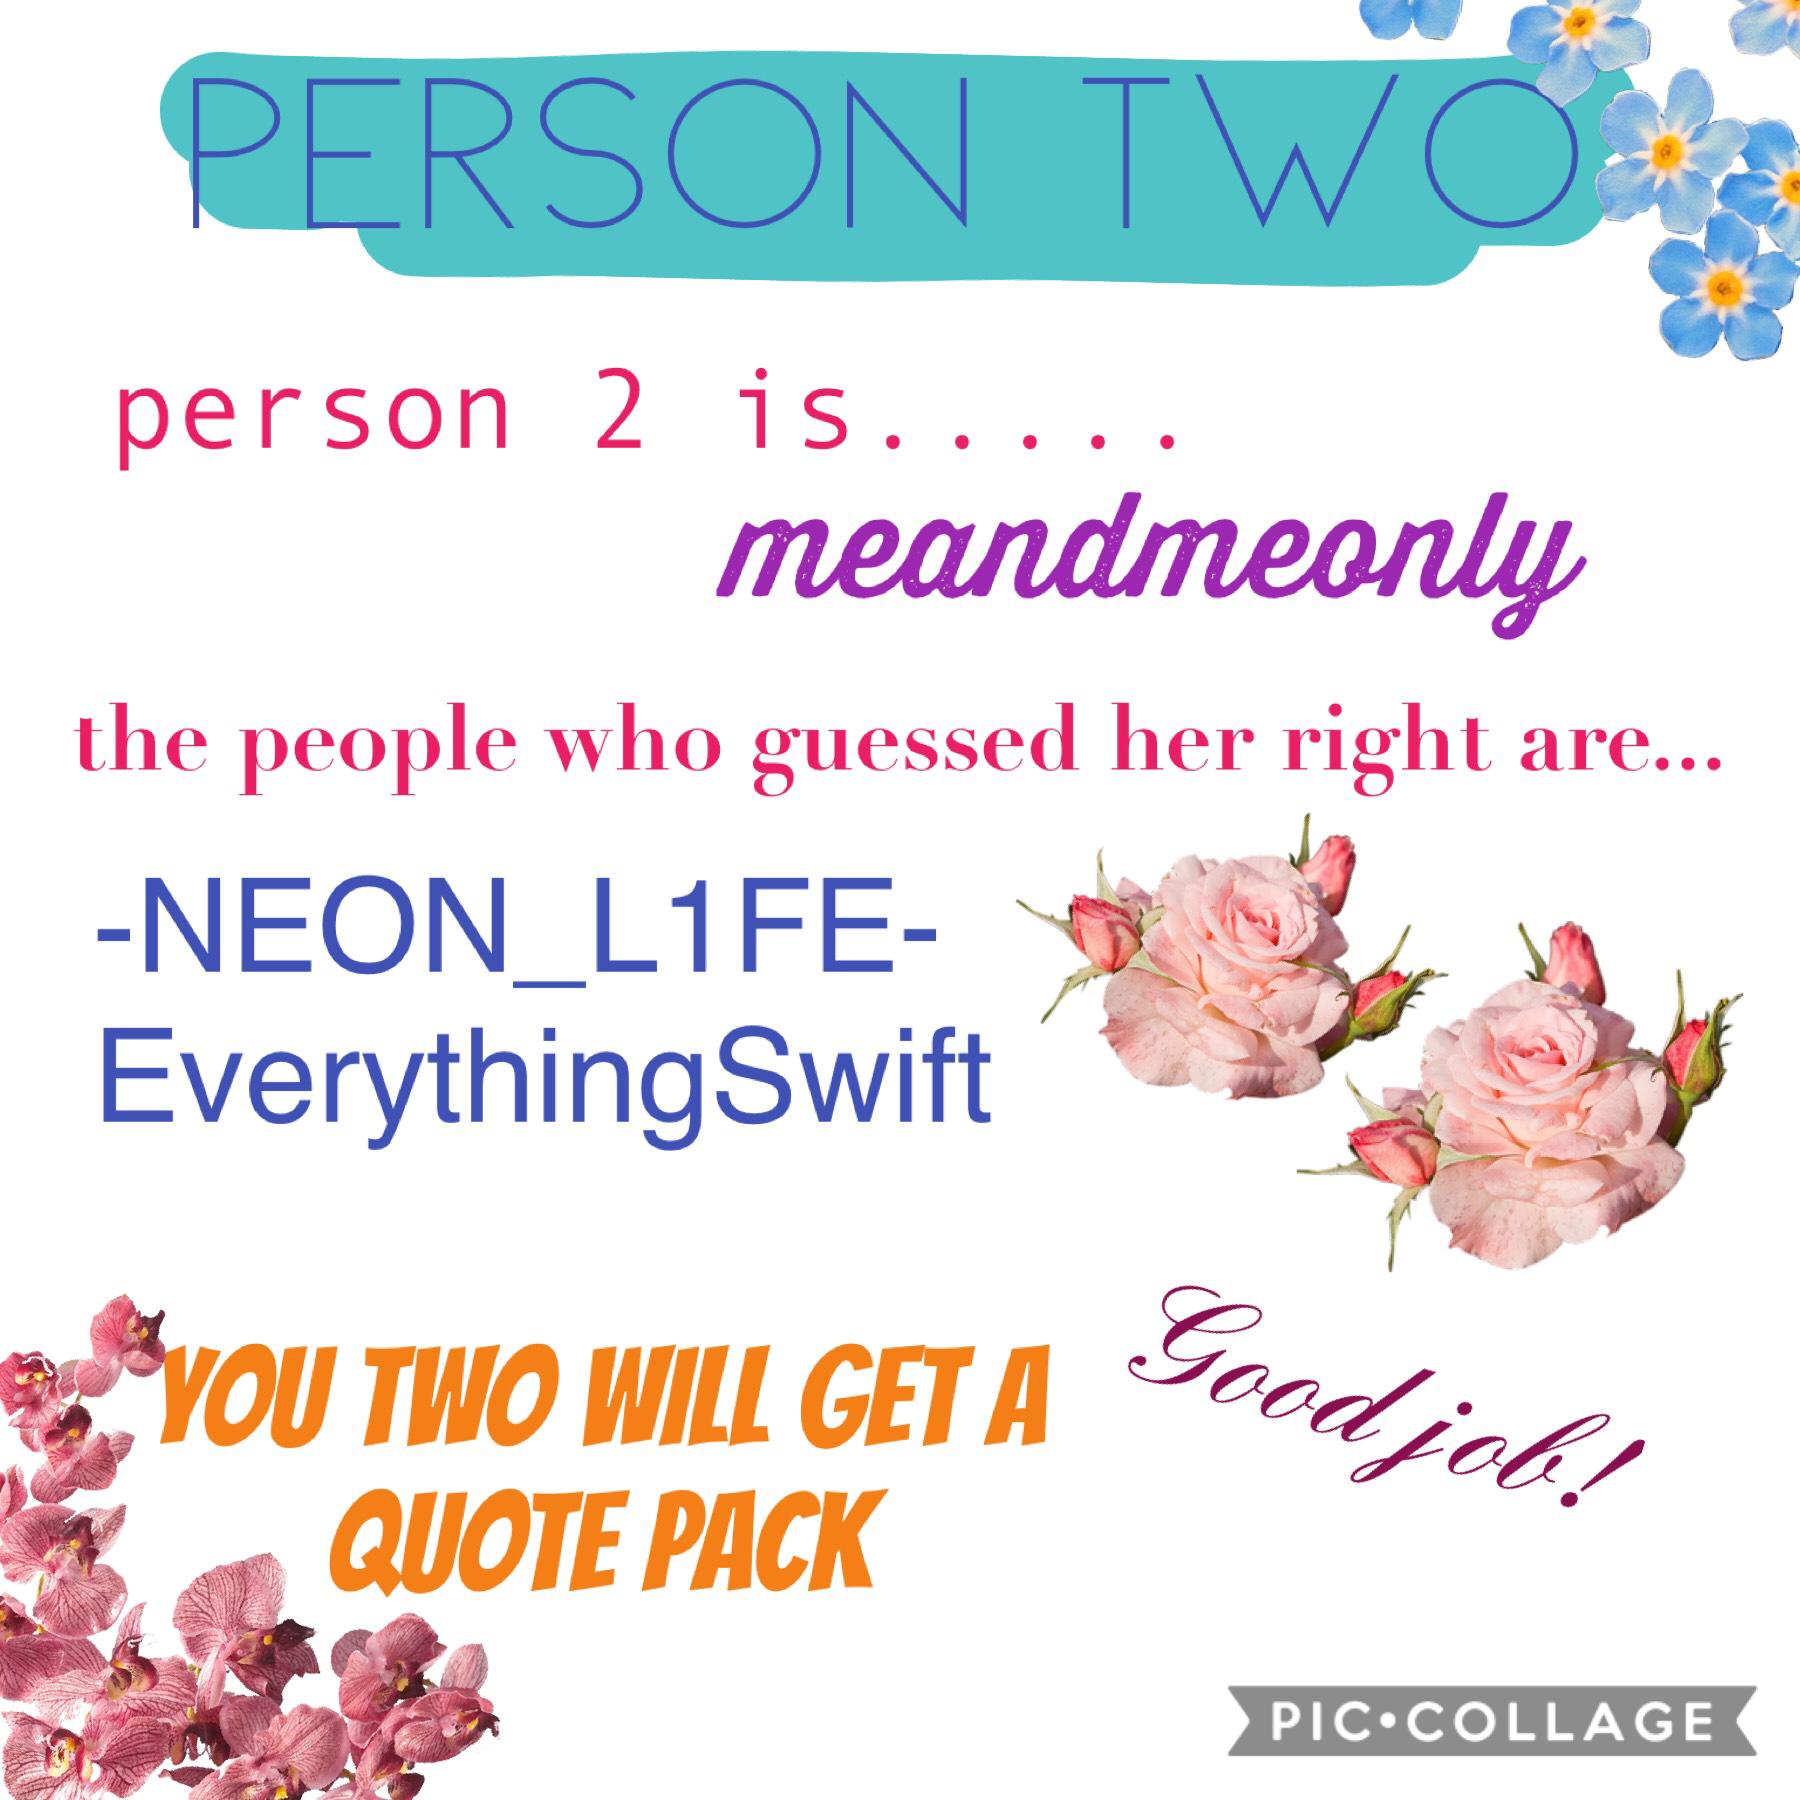 Person two is..... (tap)
meandmeonly!!!! 💞💞💖💖💖
Yay!!!!!!